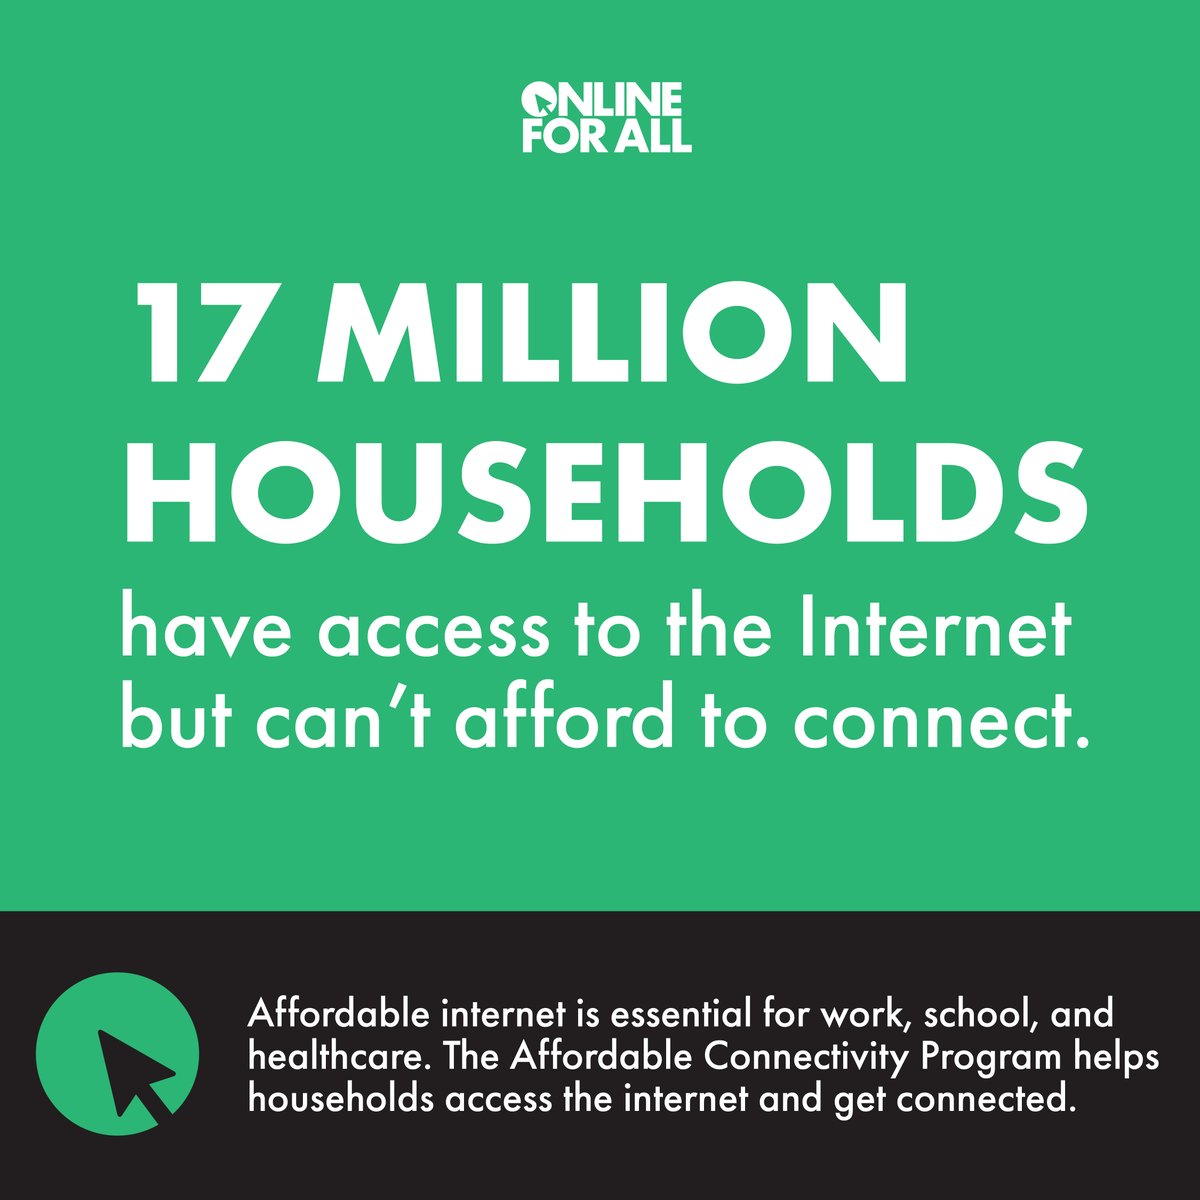 Digital inclusion means equitable digital access. 

Through the #OnlineForAll campaign, ED & @CivicNation work to provide free Internet access, closing the digital divide for millions of students & their families. 

Sign up at onlineforall.org.

#DigitalInclusionWeek